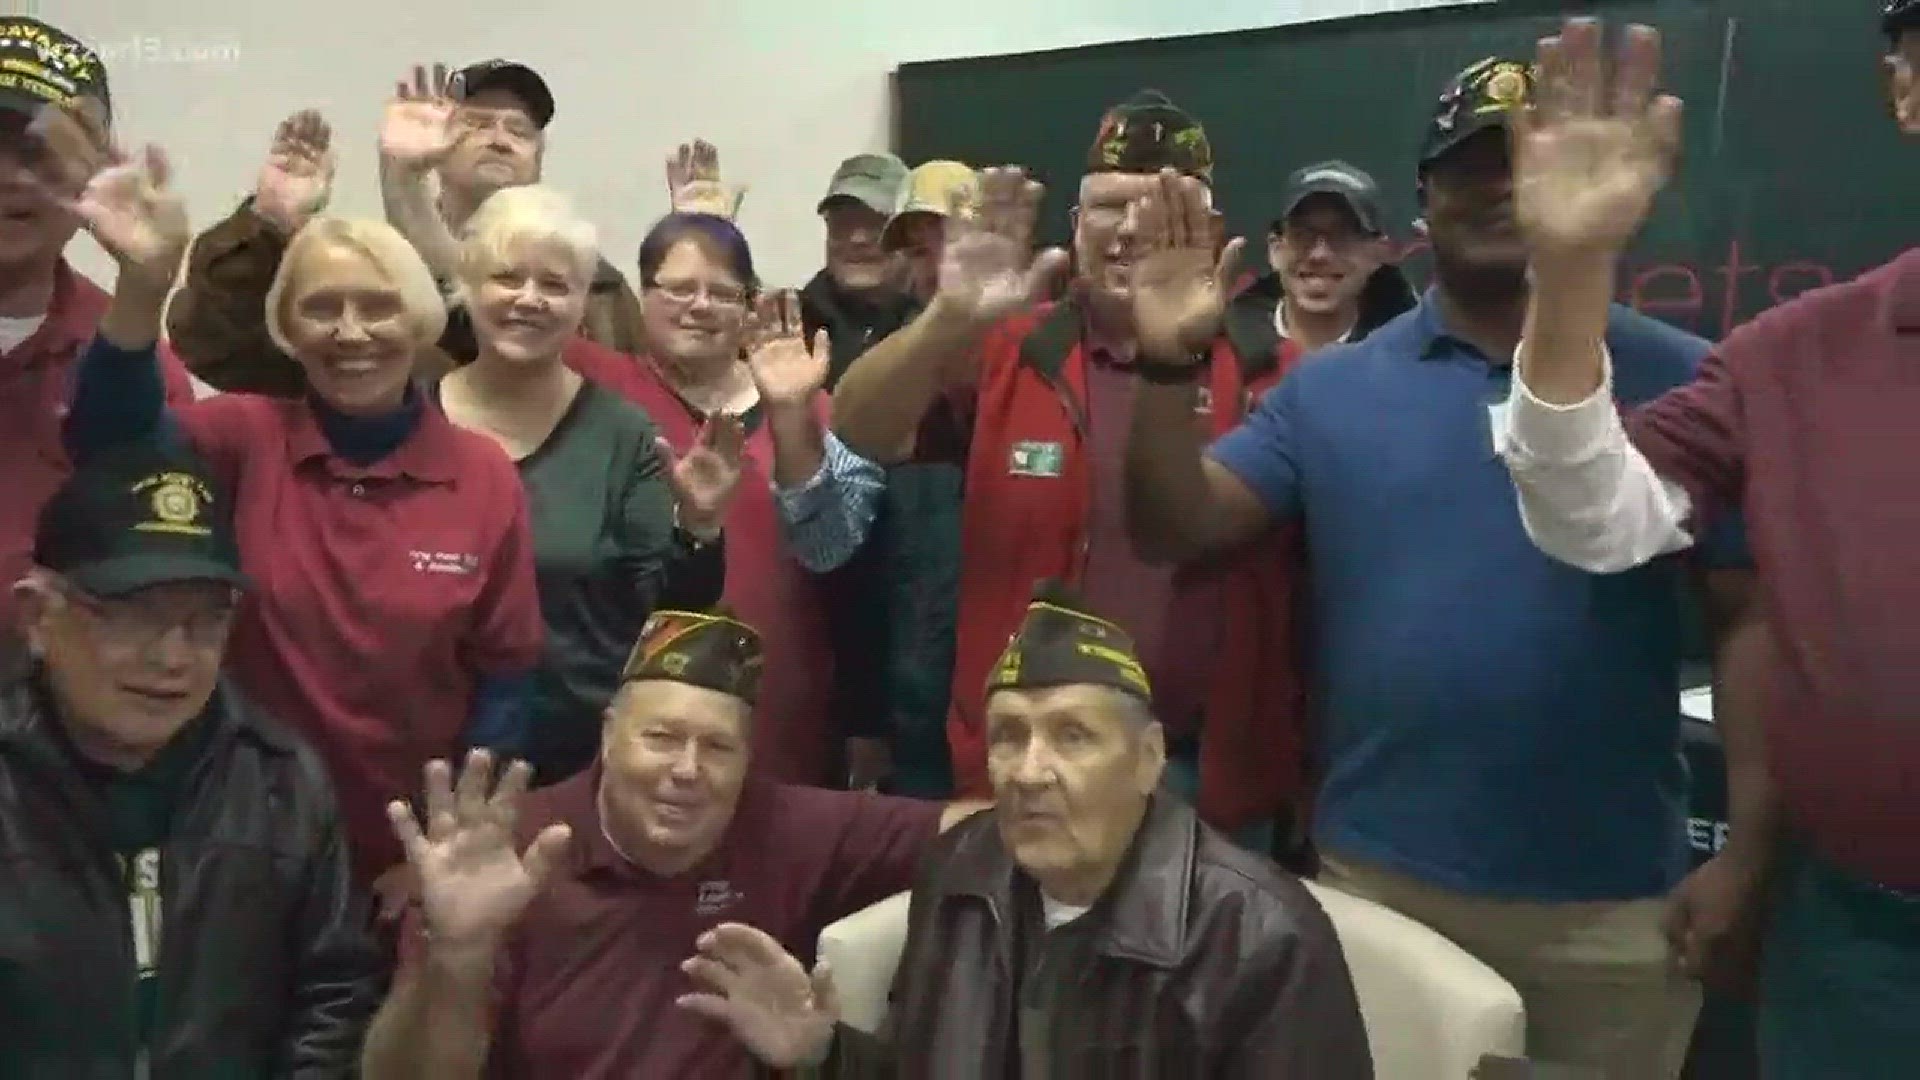 Yesterday was Veteran's Day...an opportunity to show gratitude to those who served our country in the military...here's a special morning greeting for you from a group of veteran's gathered for a recognition ceremony in Byron Center in partnership with the VFW Post 702 and auxiliary.